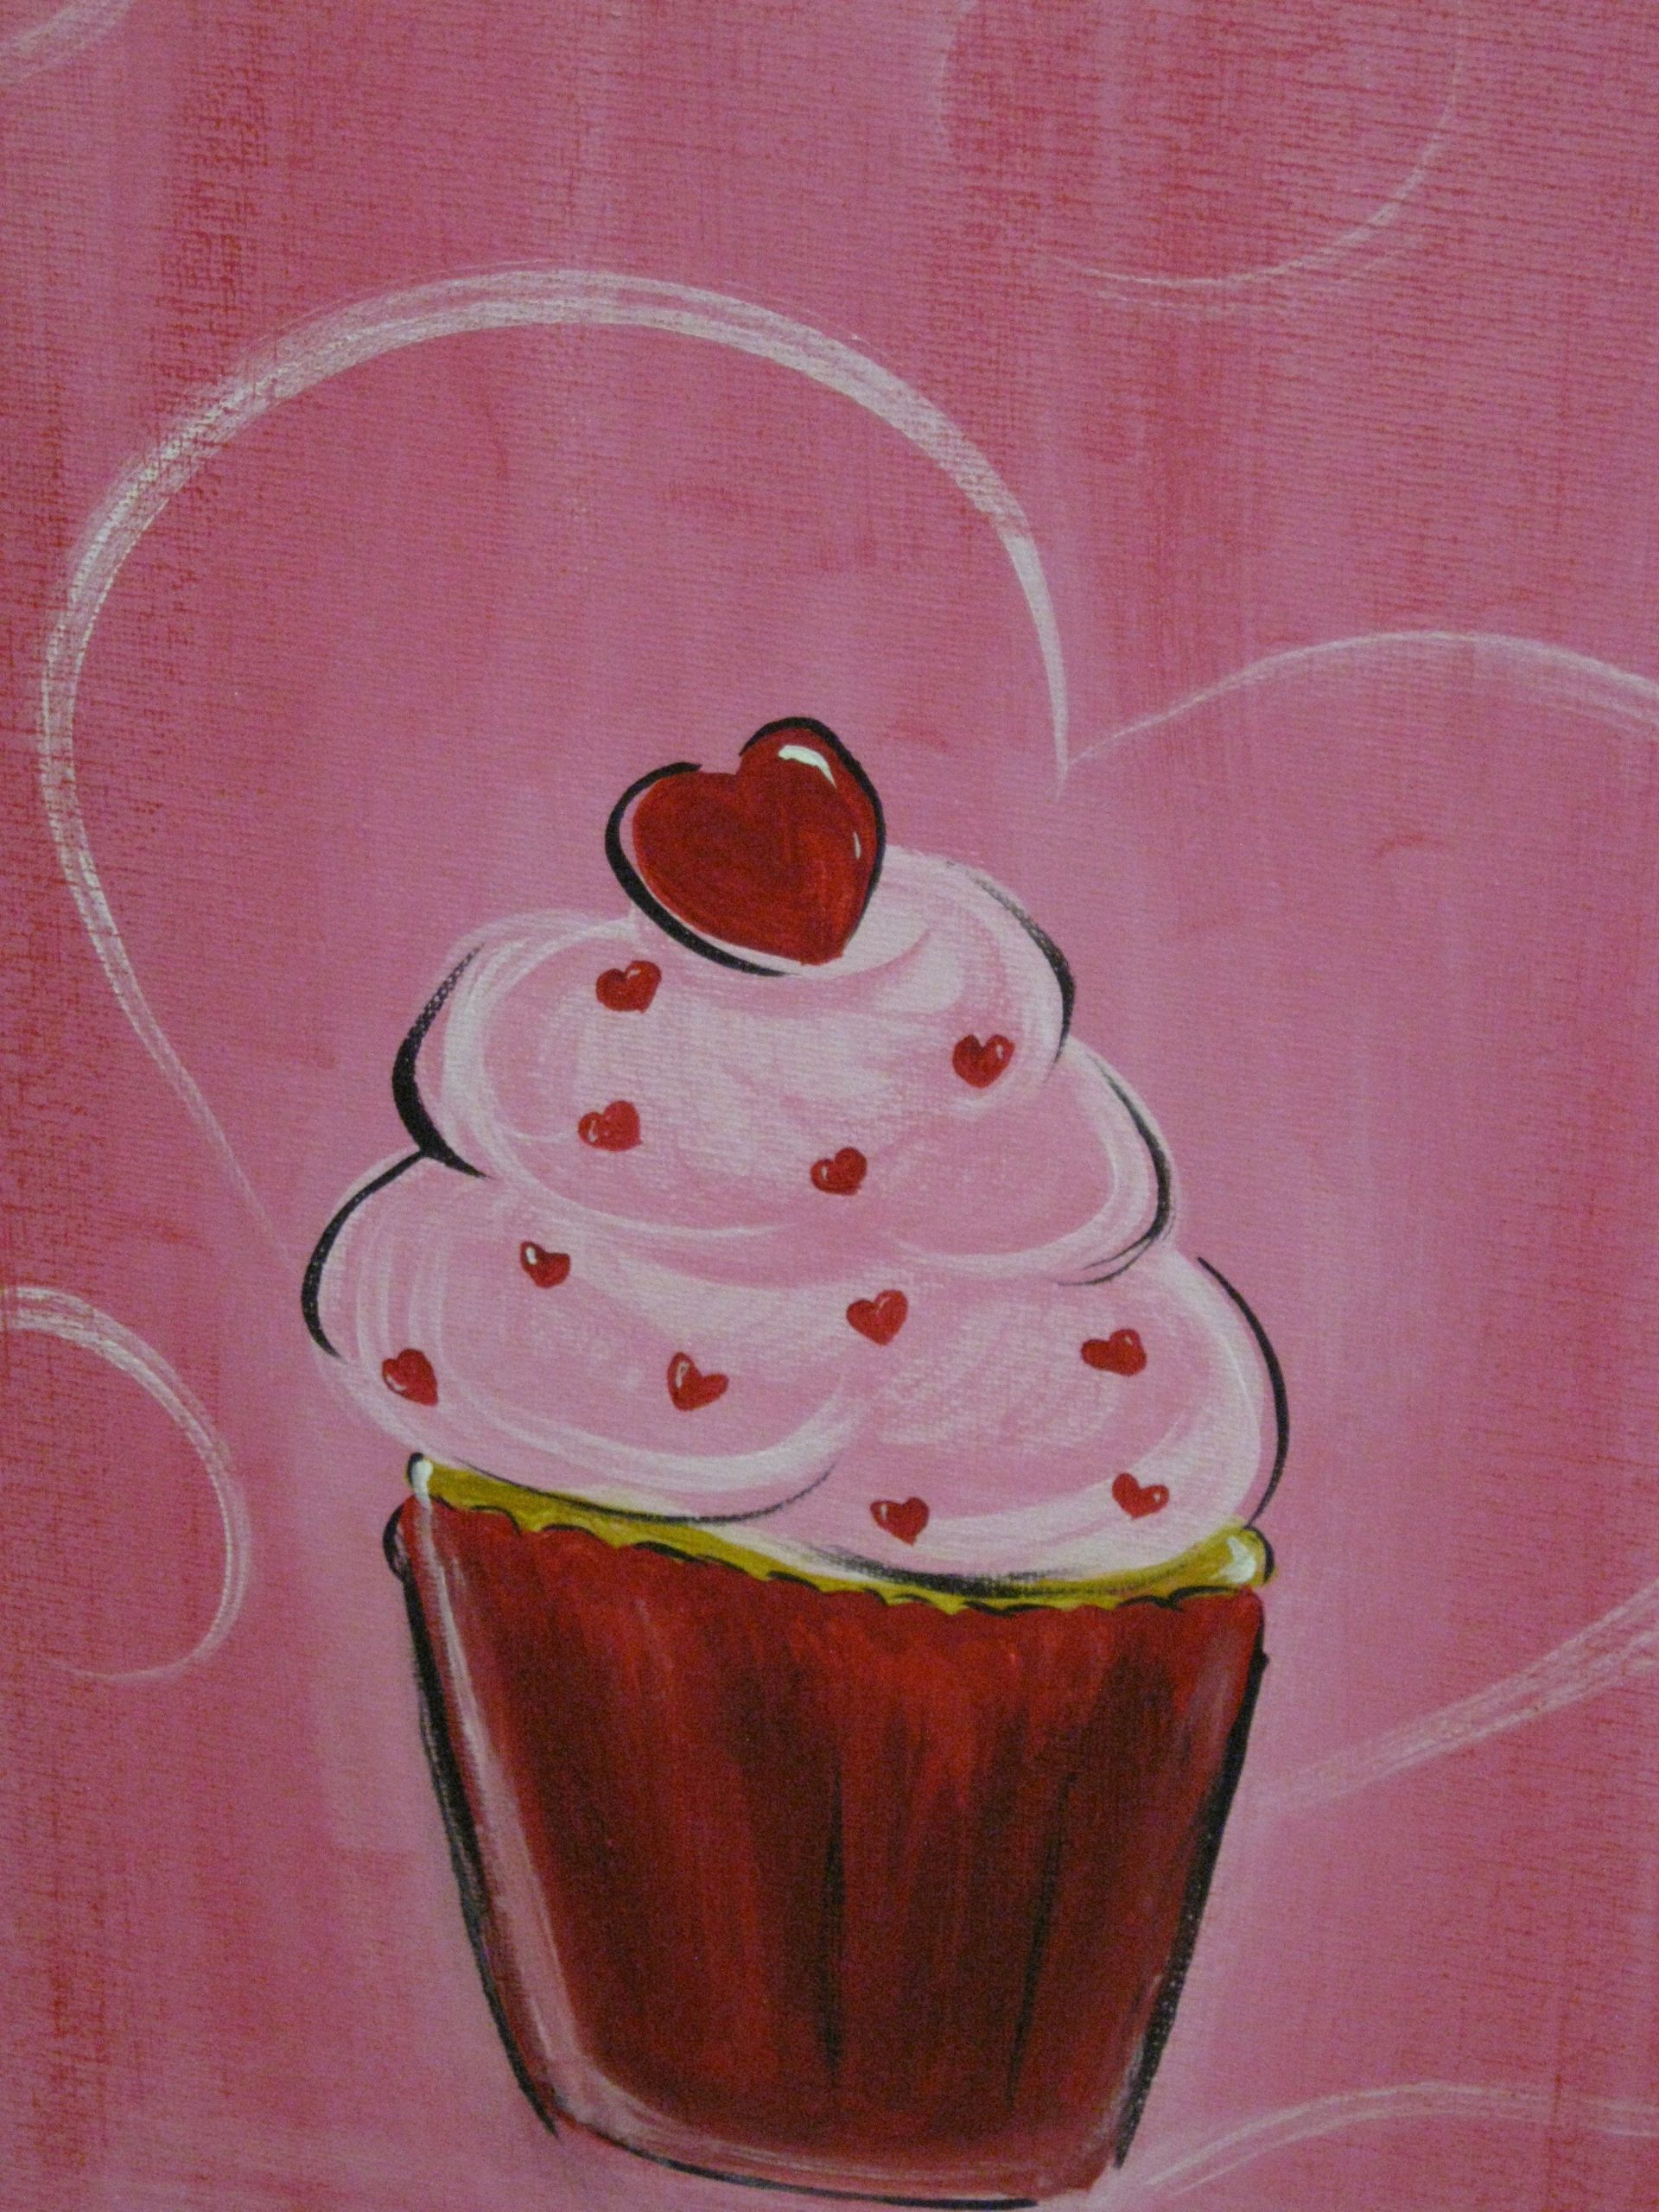 Valentines Day Painting Ideas
 Cute cupcake canvas paint idea for wall decor Pink and